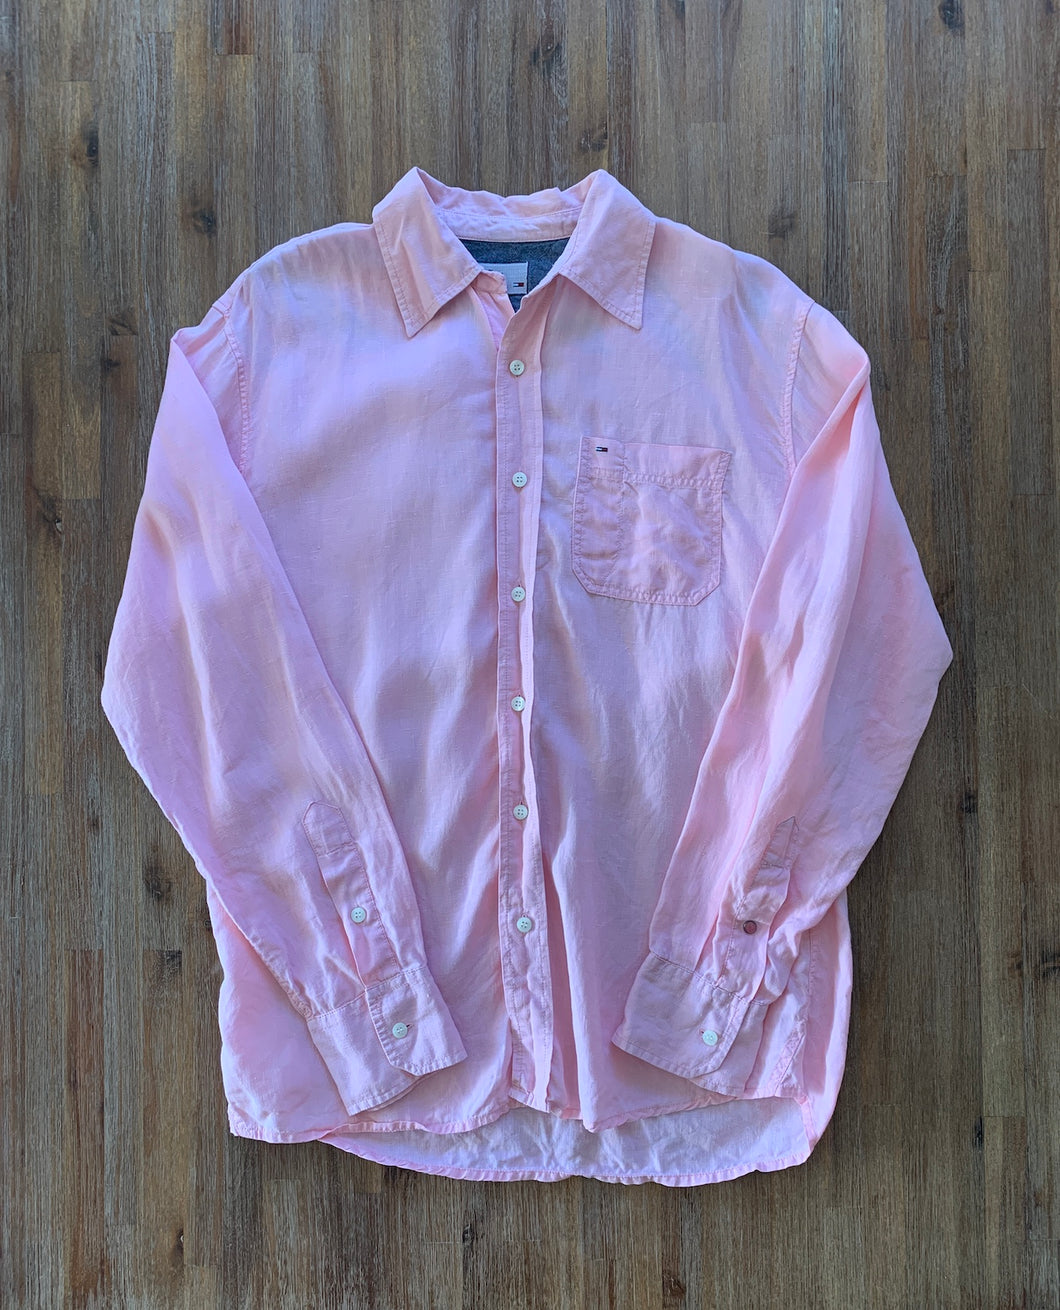 TOMMY HILFIGER Size S Long Sleeve Linen Shirt in Salmon Pink Men's SEP99